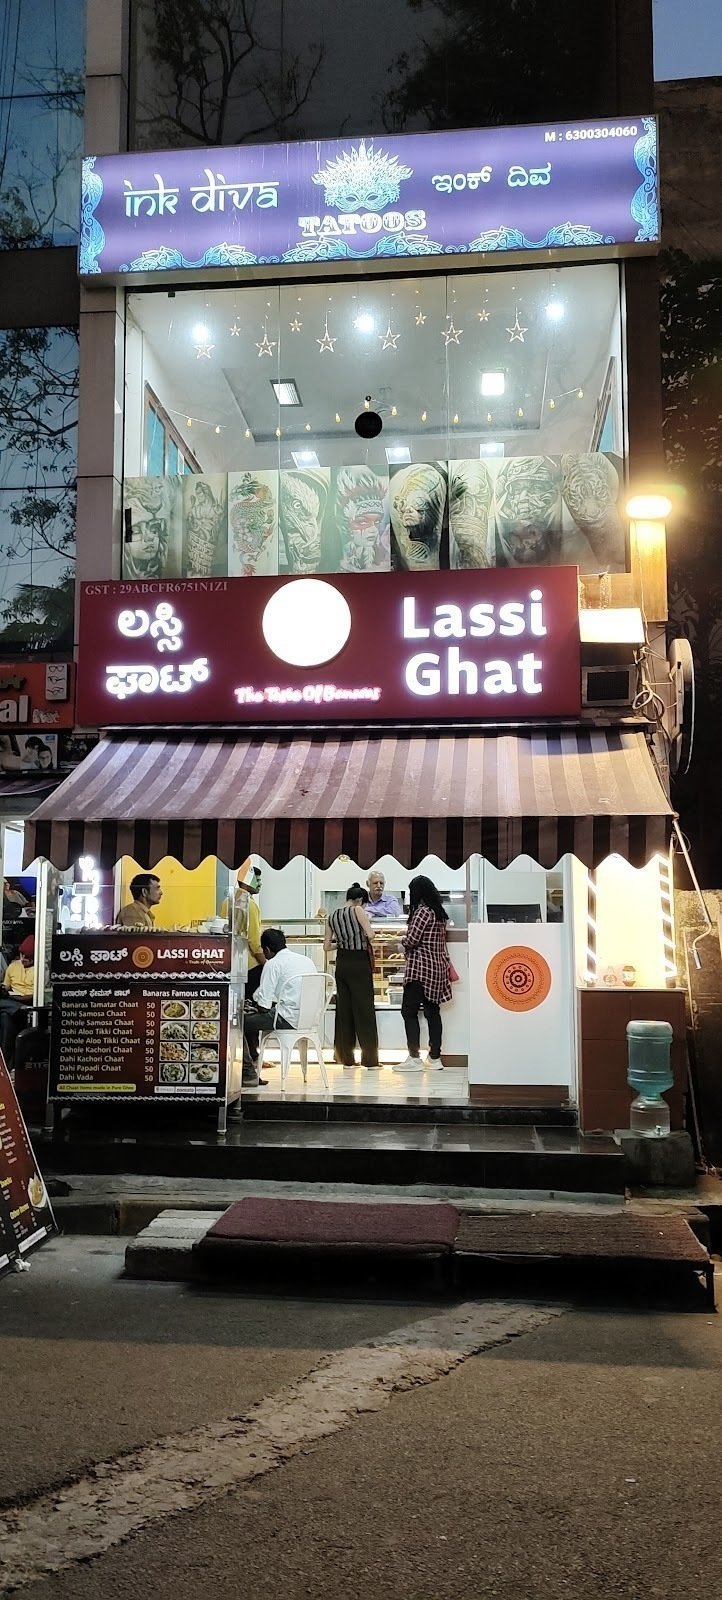 <span class="translation_missing" title="translation missing: en.meta.location_title, location_name: VARANASI CAFE, city: Bengaluru">Location Title</span>